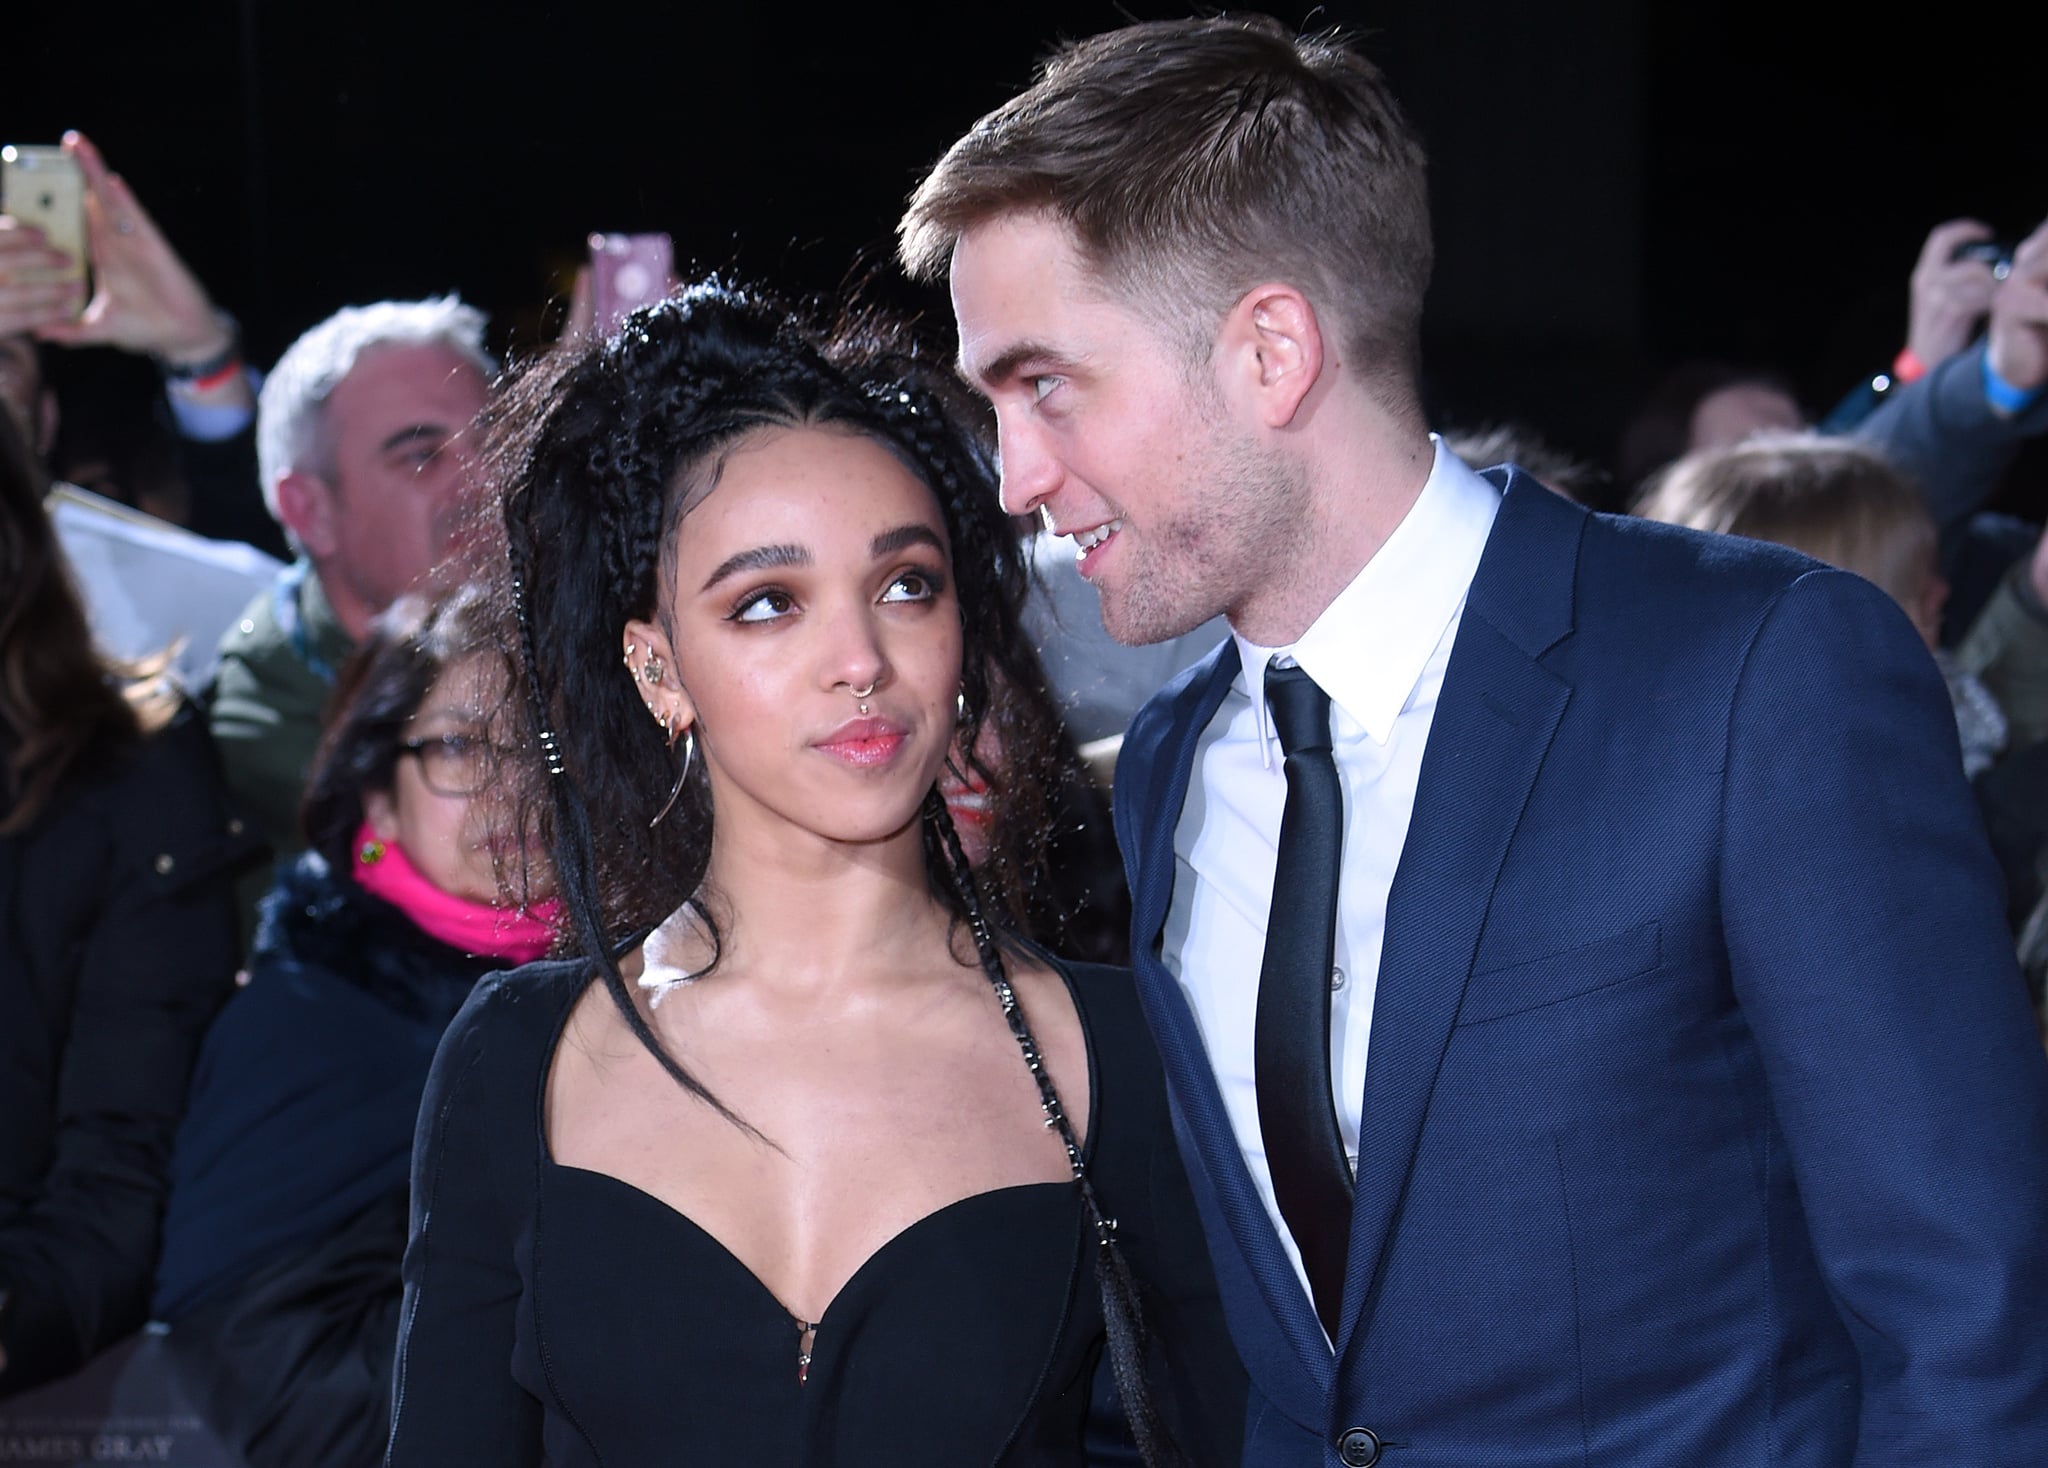 LONDON, ENGLAND - FEBRUARY 16:  Robert Pattinson and FKA Twigs arrive at The Lost City of Z UK premiere on February 16, 2017 in London, United Kingdom.  (Photo by Anthony Harvey/Getty Images)